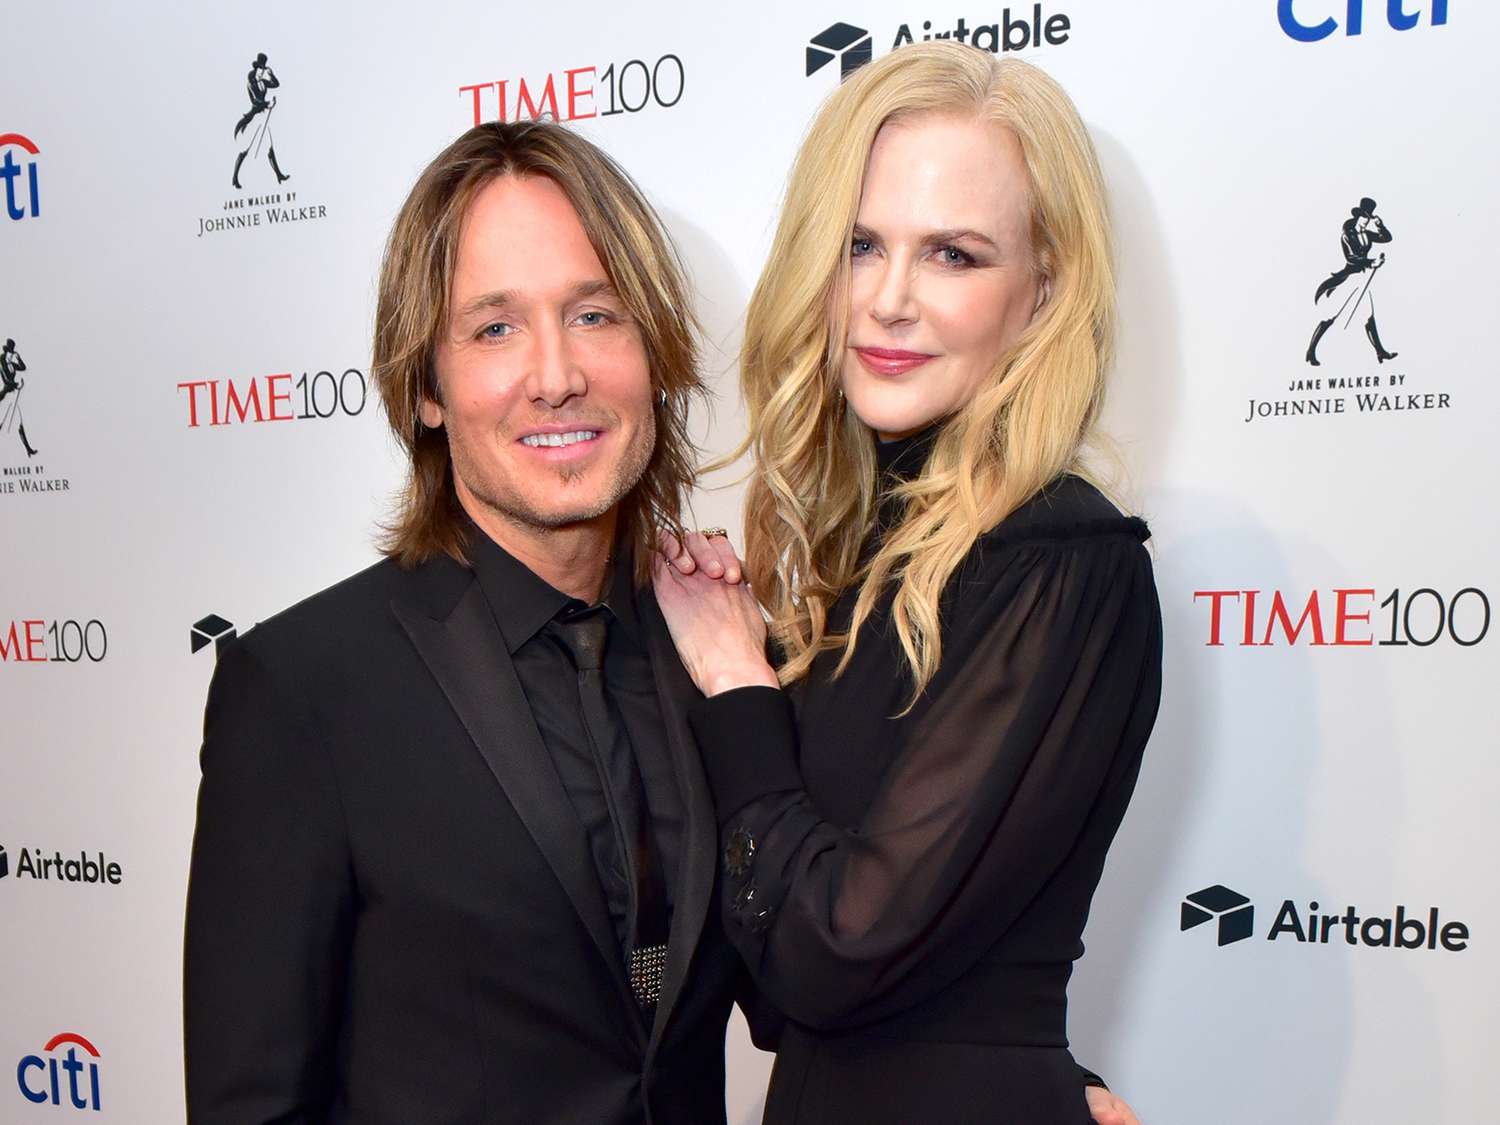 Keith Urban and Nicole Kidman attend the 2018 TIME 100 Gala at Jazz at Lincoln Center on April 24, 2018 in New York City